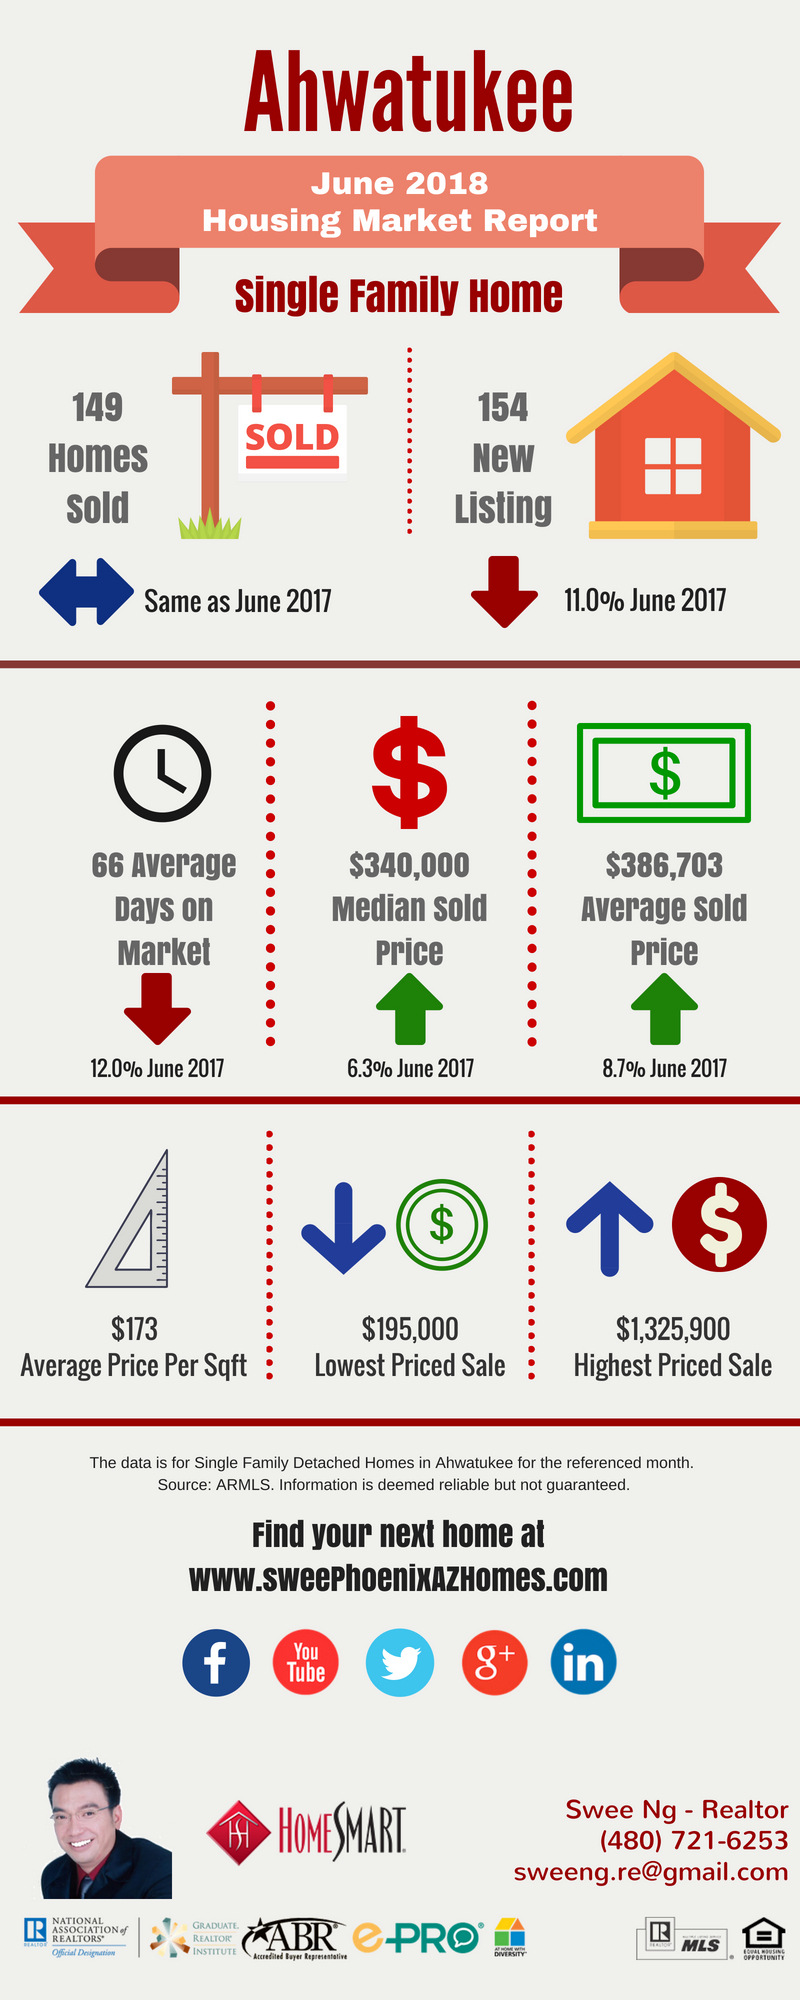 Ahwatukee Housing Market Trends Report June 2018, House Value, Real Estate and Statistic by Swee Ng